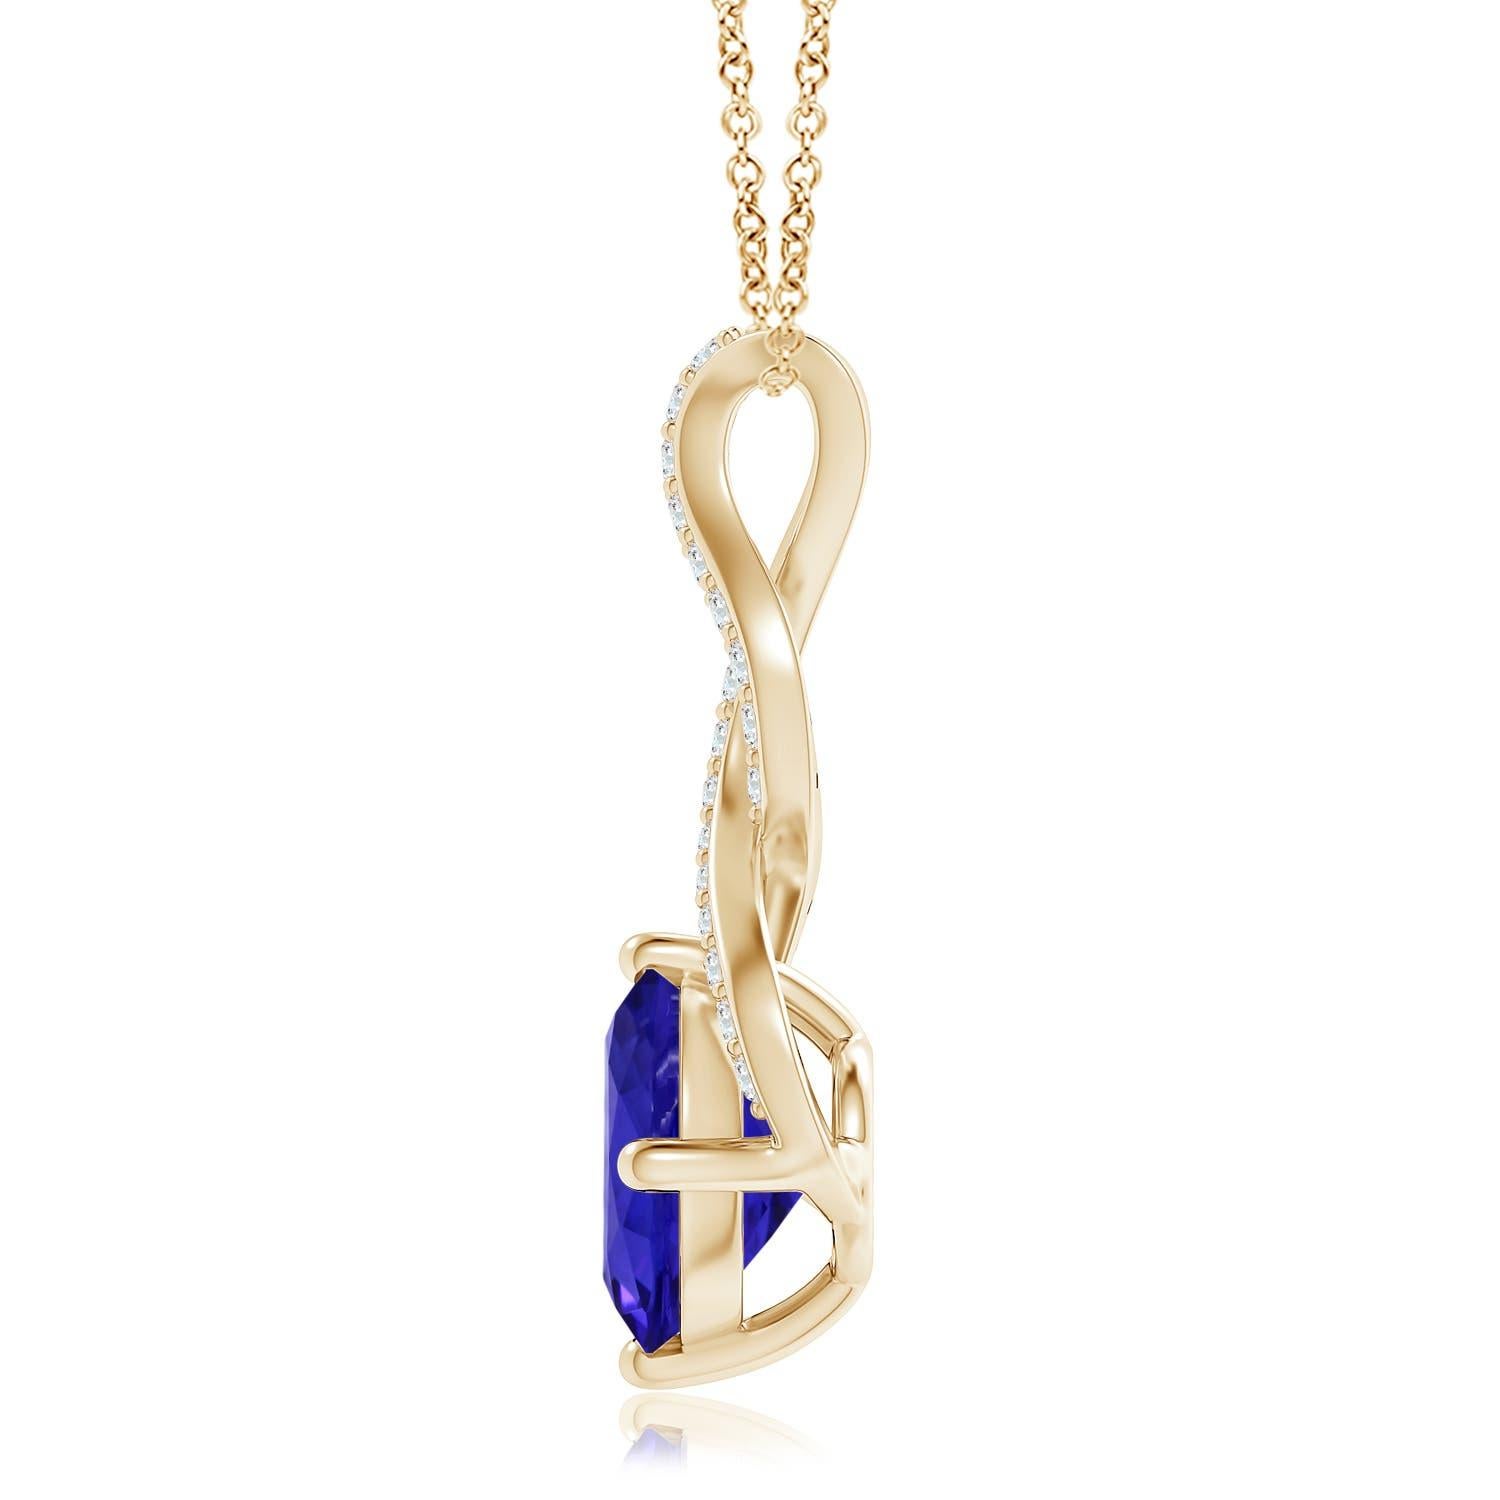 A beautiful interpretation of the iconic infinity sign, this 14k yellow gold tanzanite pendant features a dazzling infinity-shaped bale. The prong-set GIA certified tanzanite is accentuated by the brilliant diamonds on the twisted bale.
